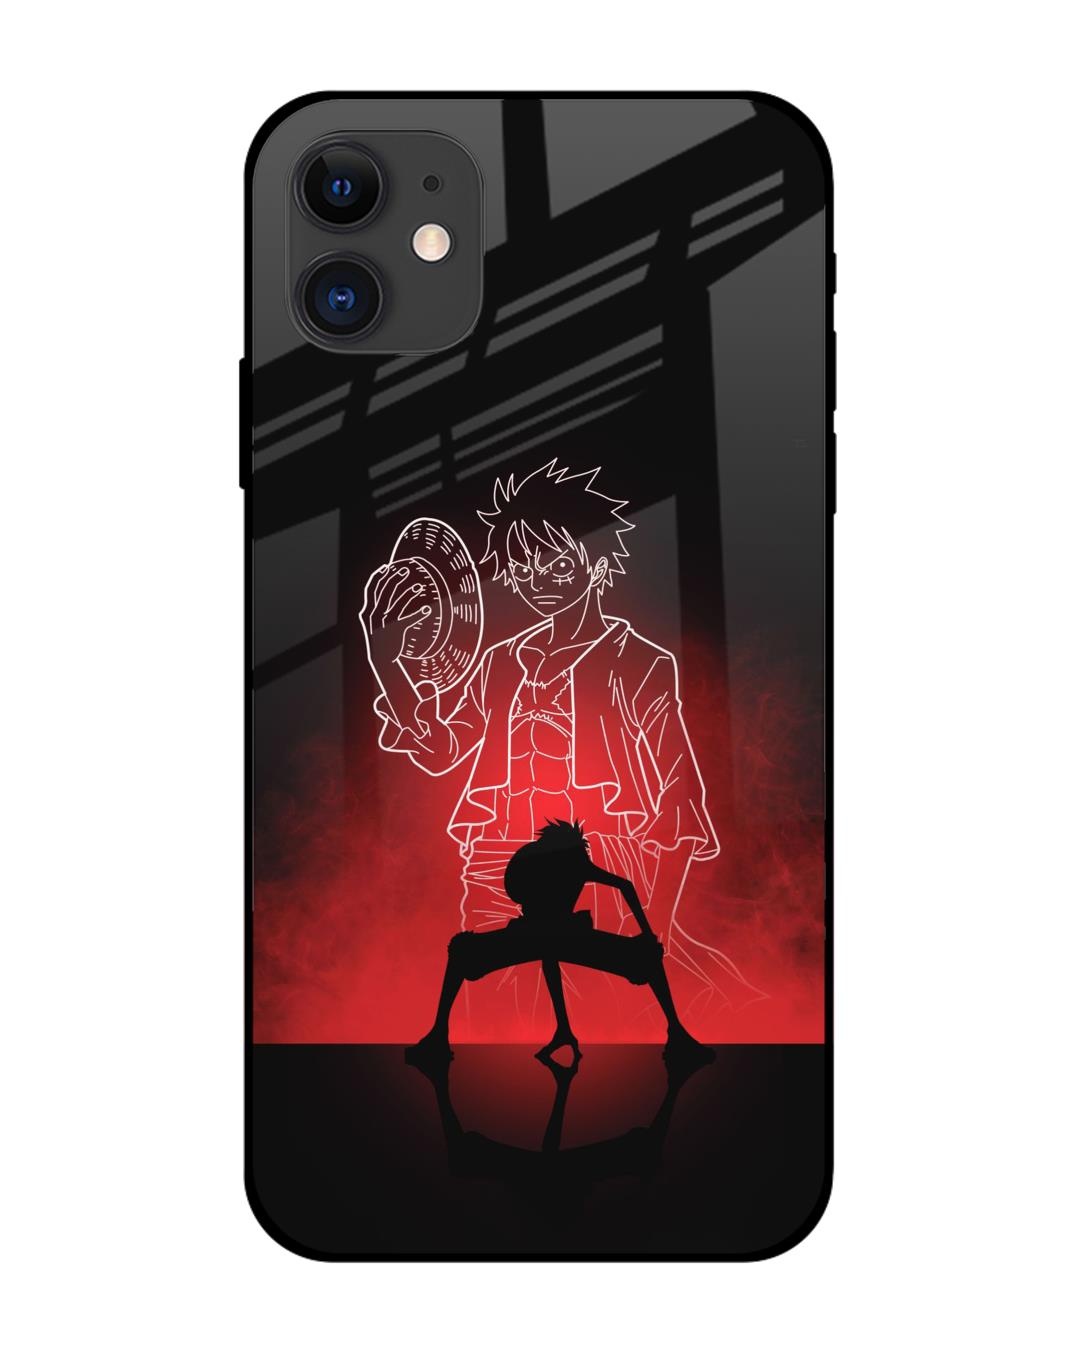 ANIME PHONE COVERS  MERCH MAKERS